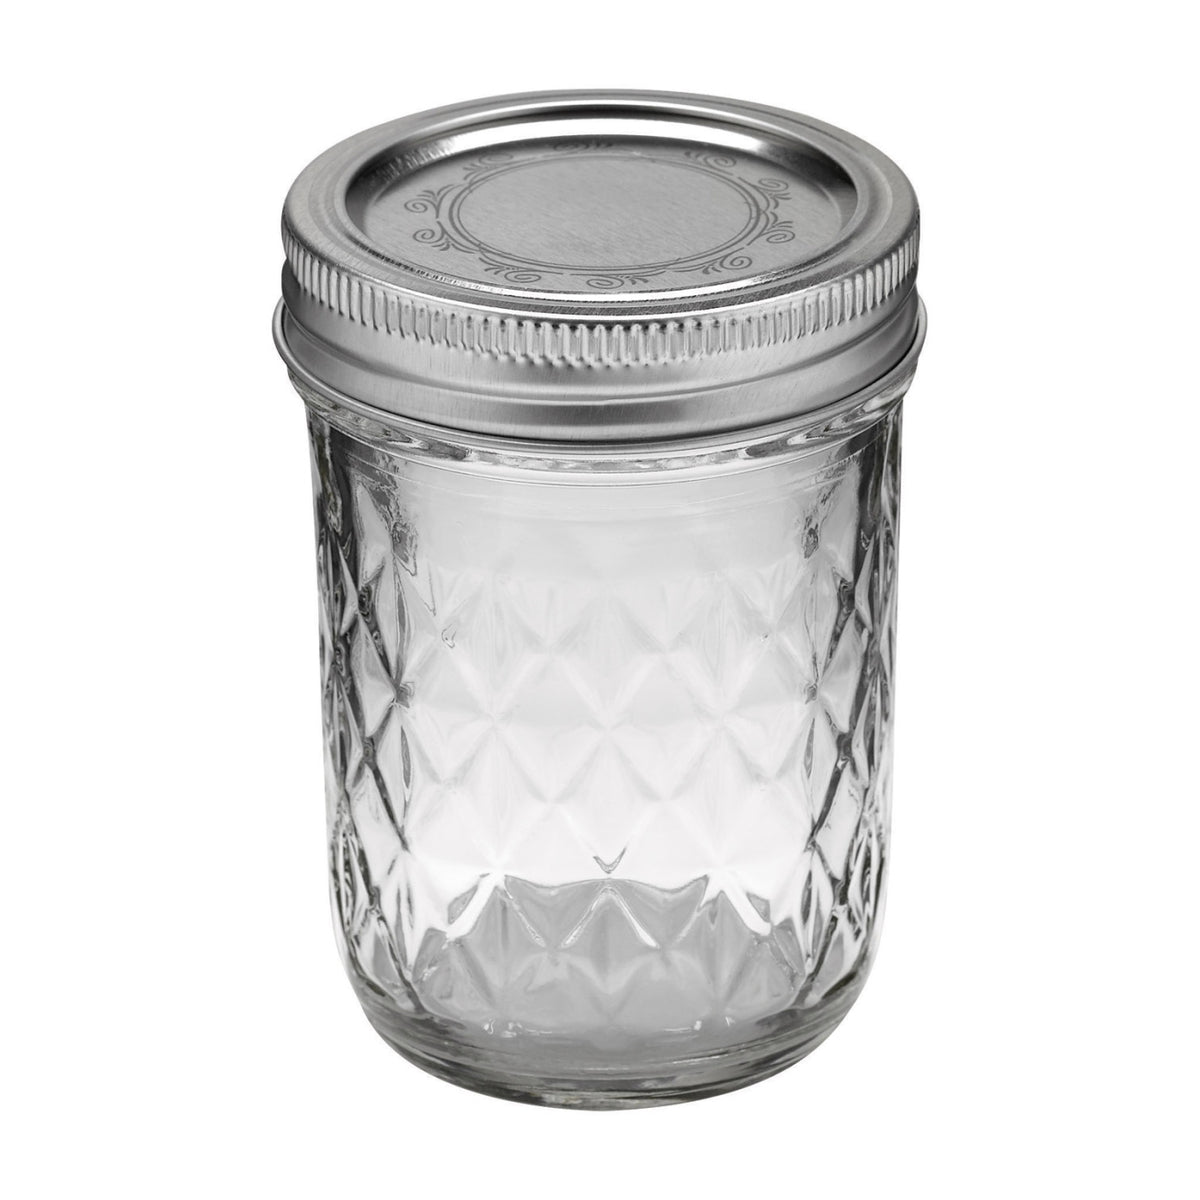 Ball 1440081200 Jelly Jars, 8 Oz, Regular Mouth, Quilted Crystal Design